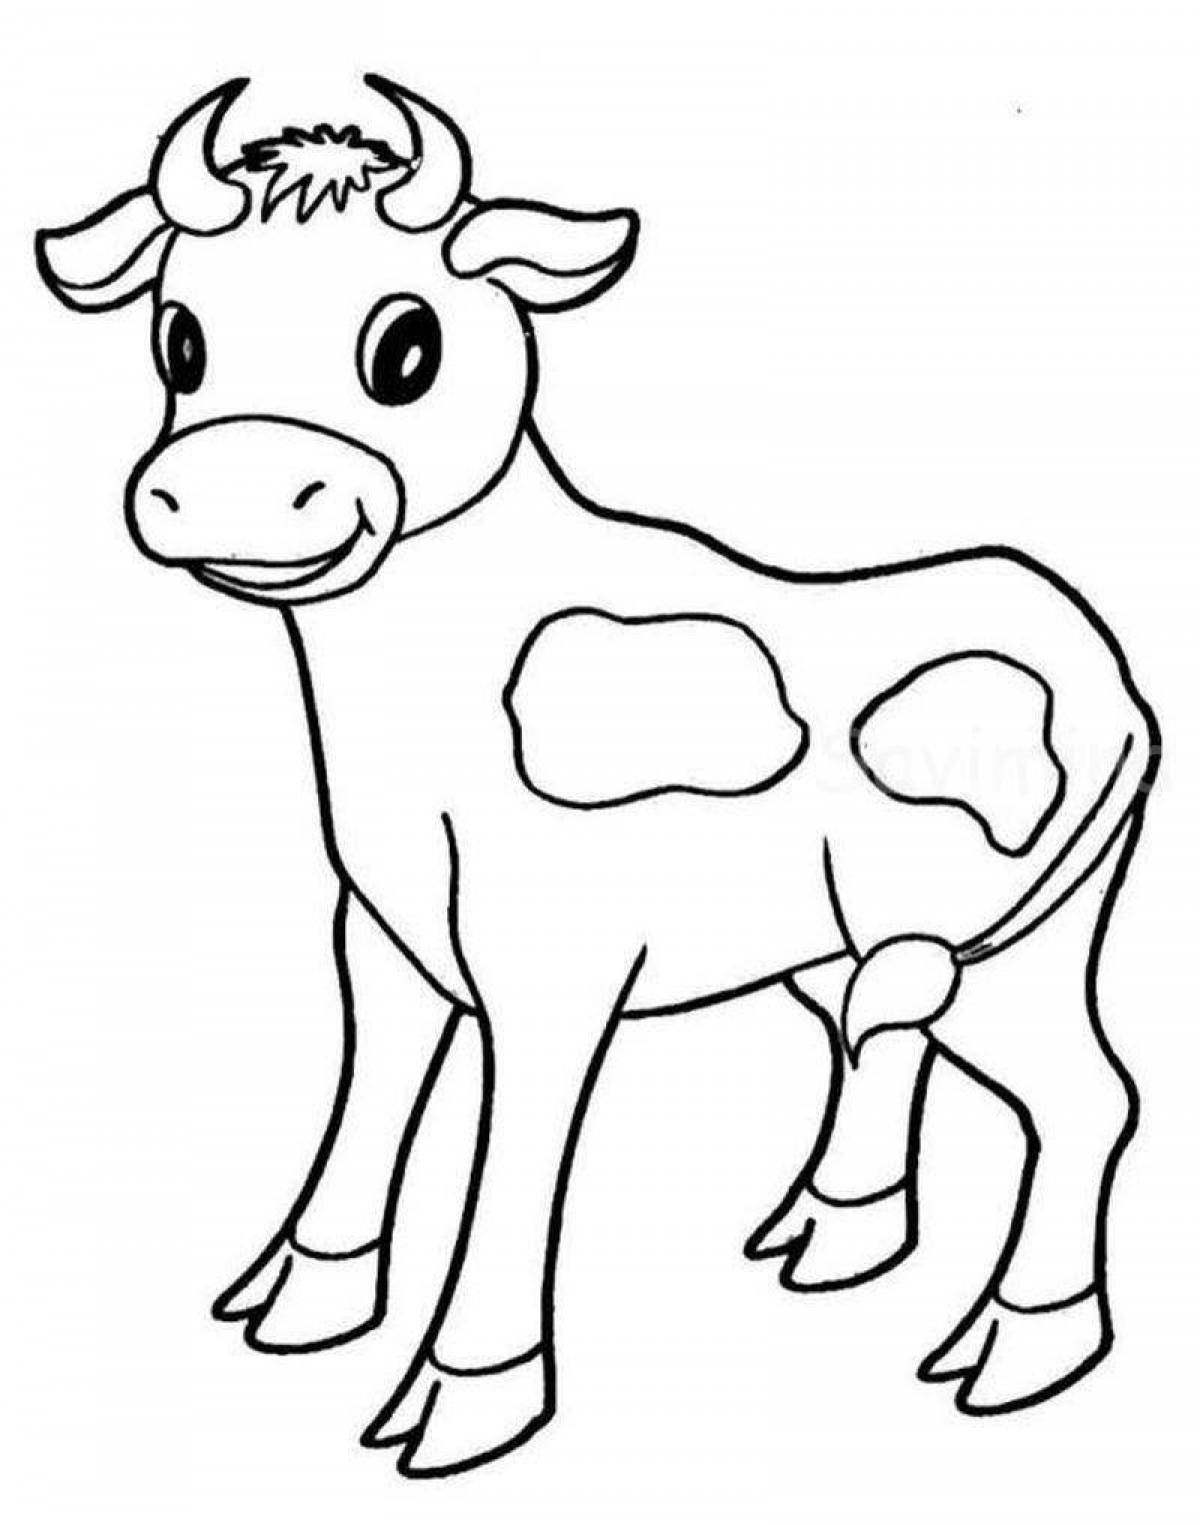 Colouring bright cow for kids